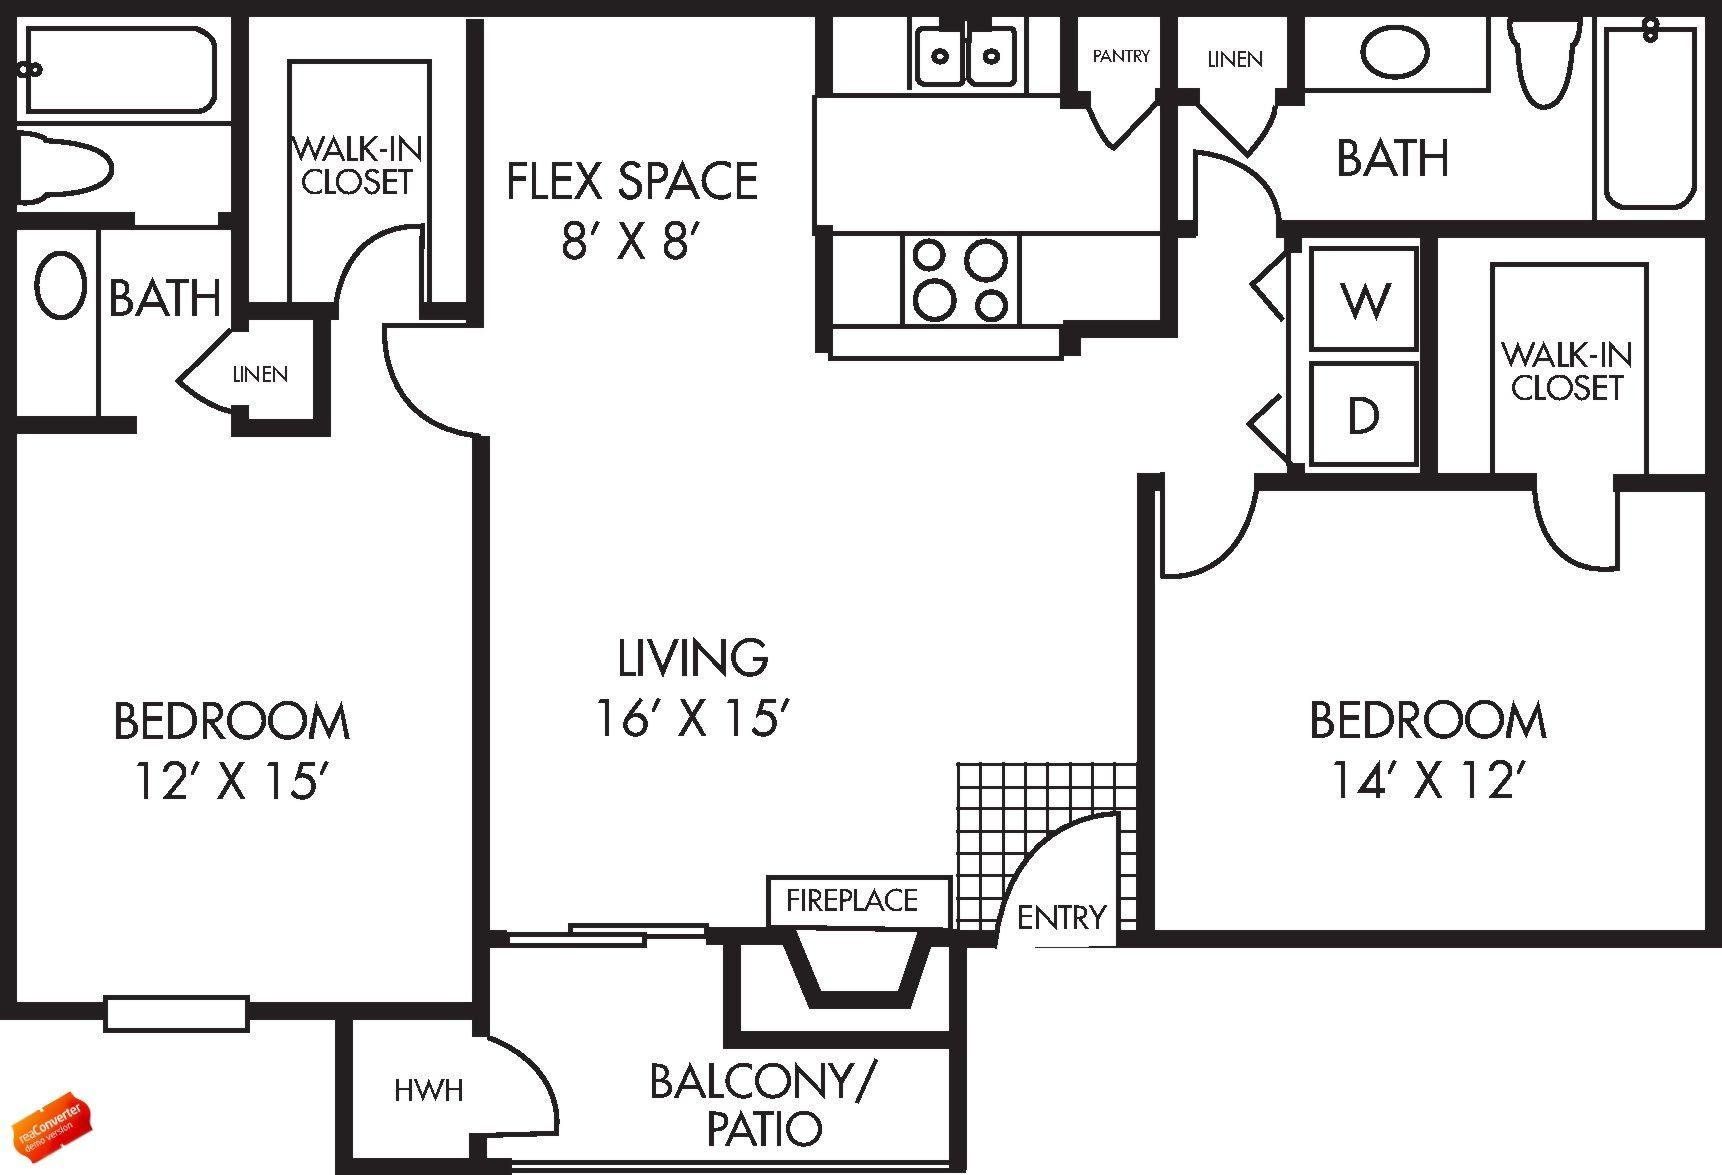 Serena Grove Floor Plans See Our Spacious Apartment Layouts